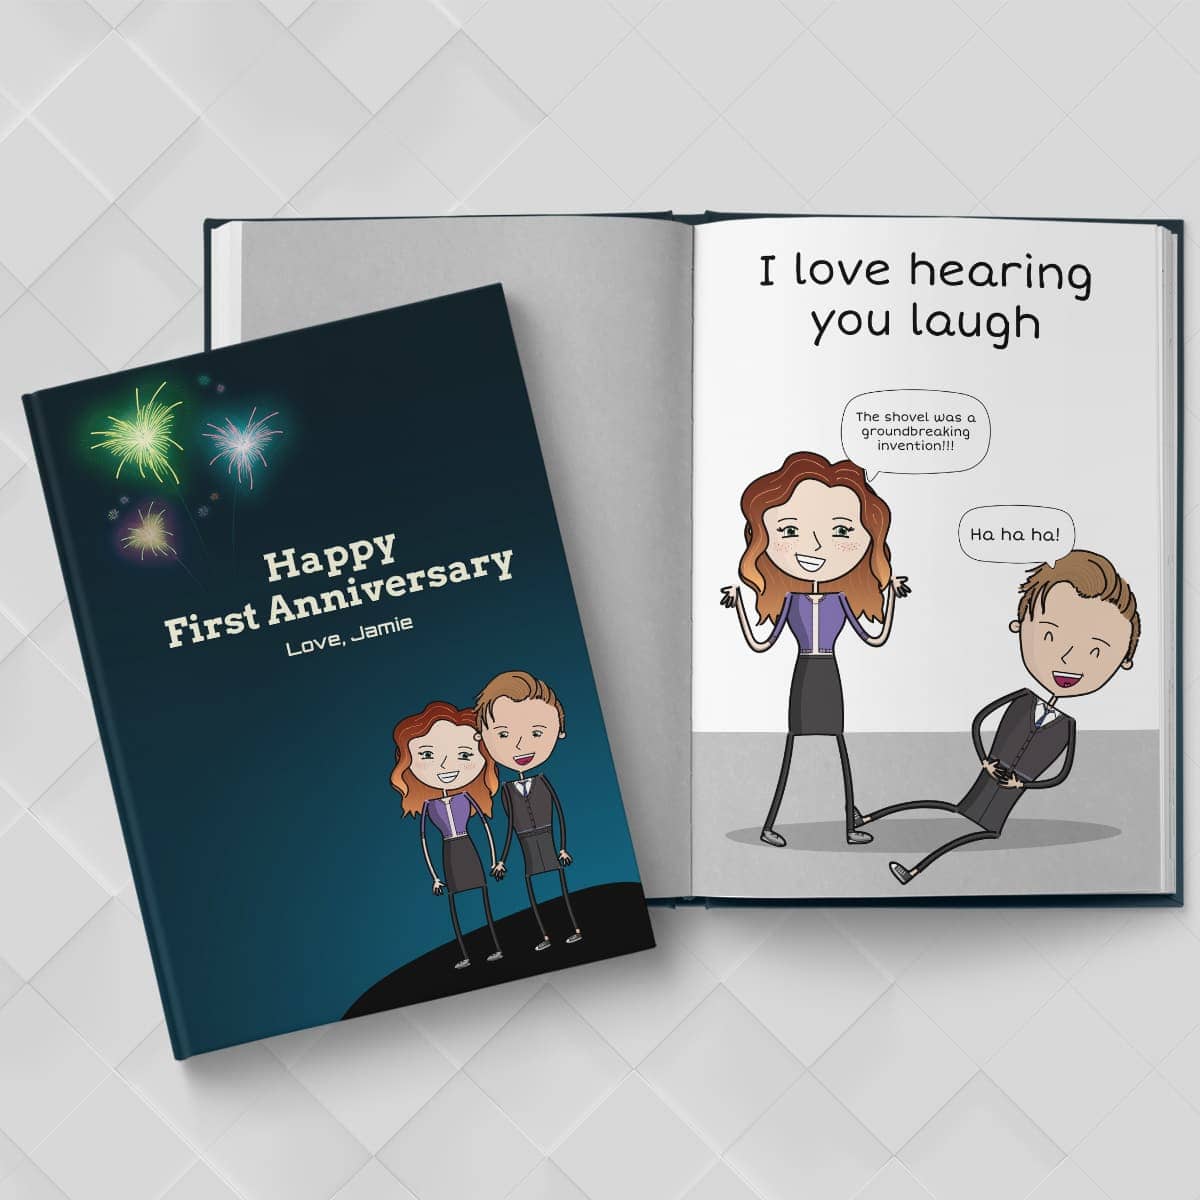 First Anniversary Gifts by LoveBook | The Personalized Gift Book That Says Why You Love Someone | LoveBook Online - 0